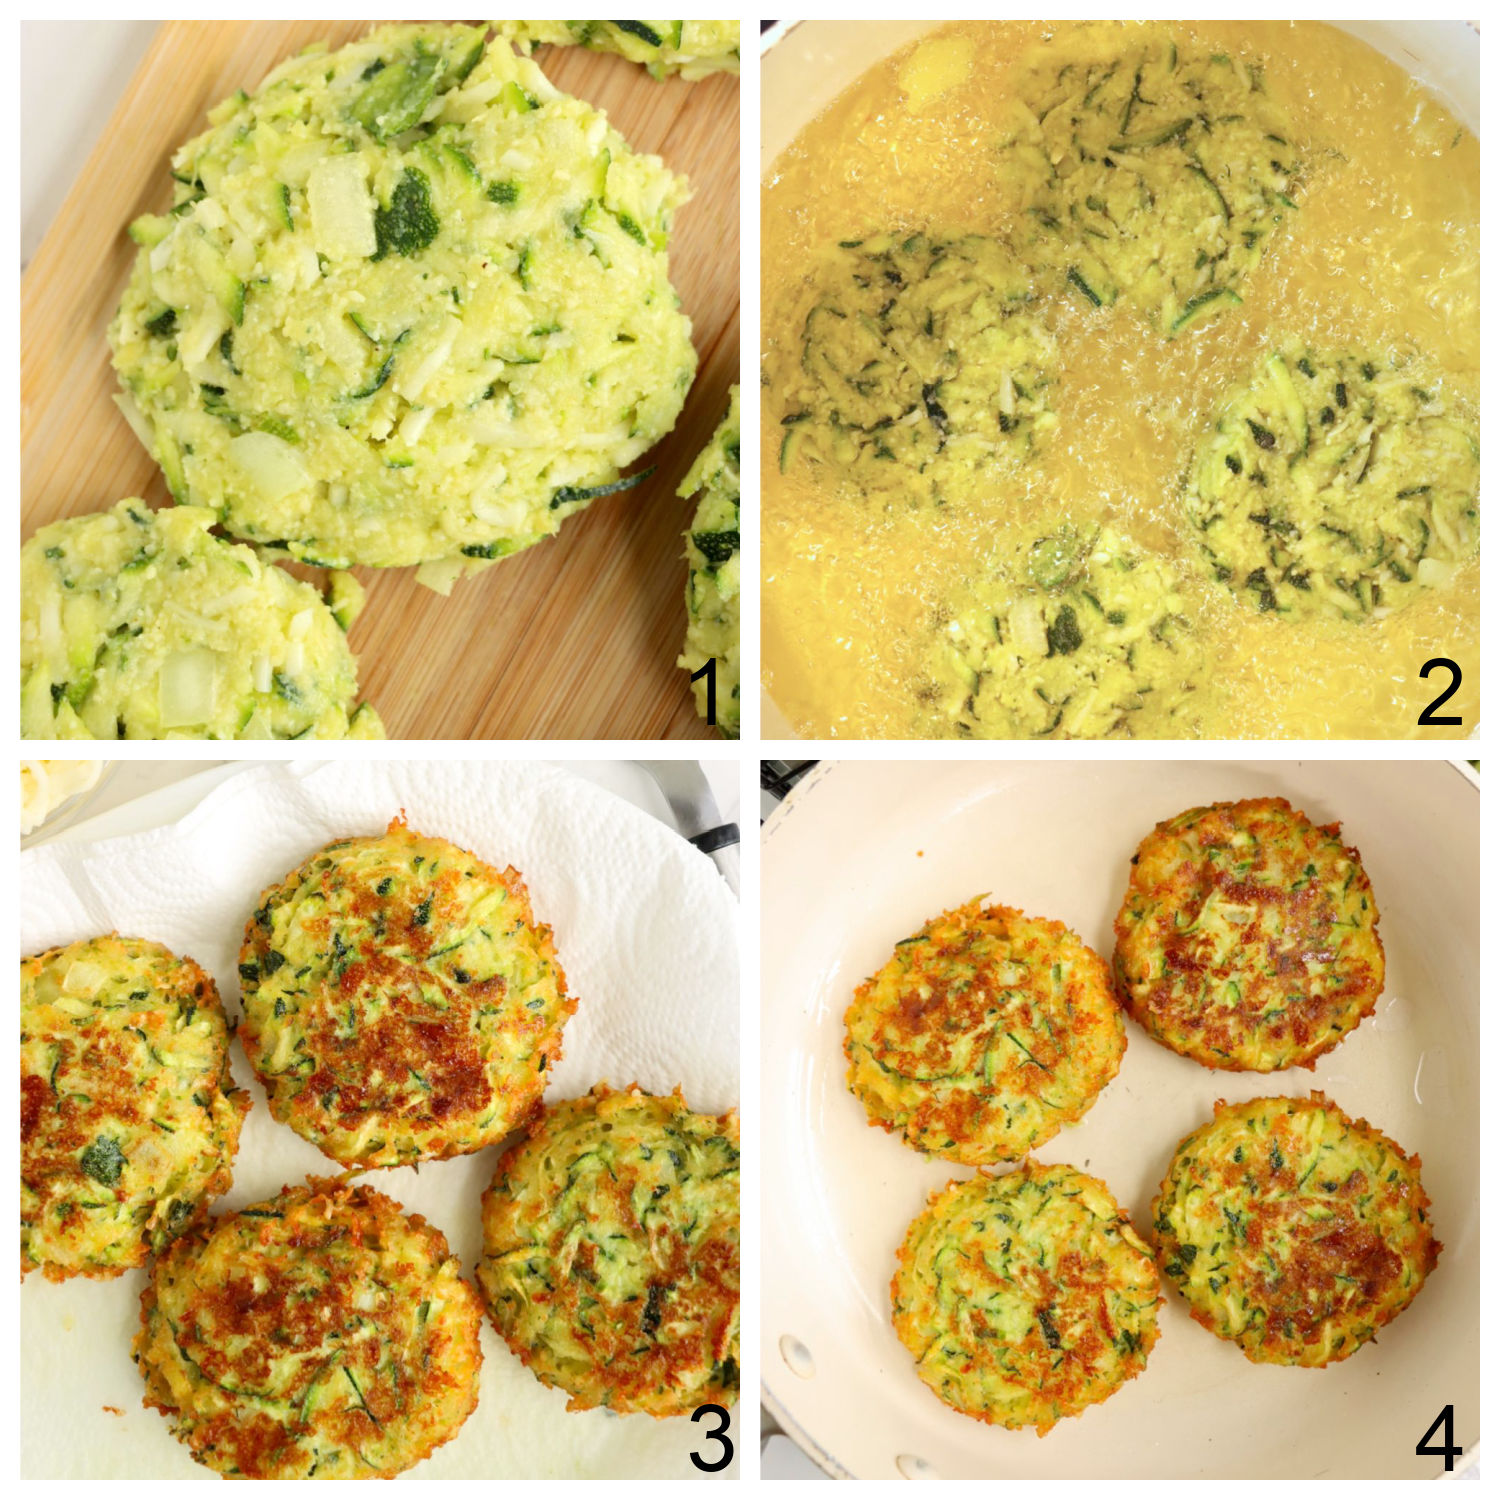 steps for making fried zucchini patties